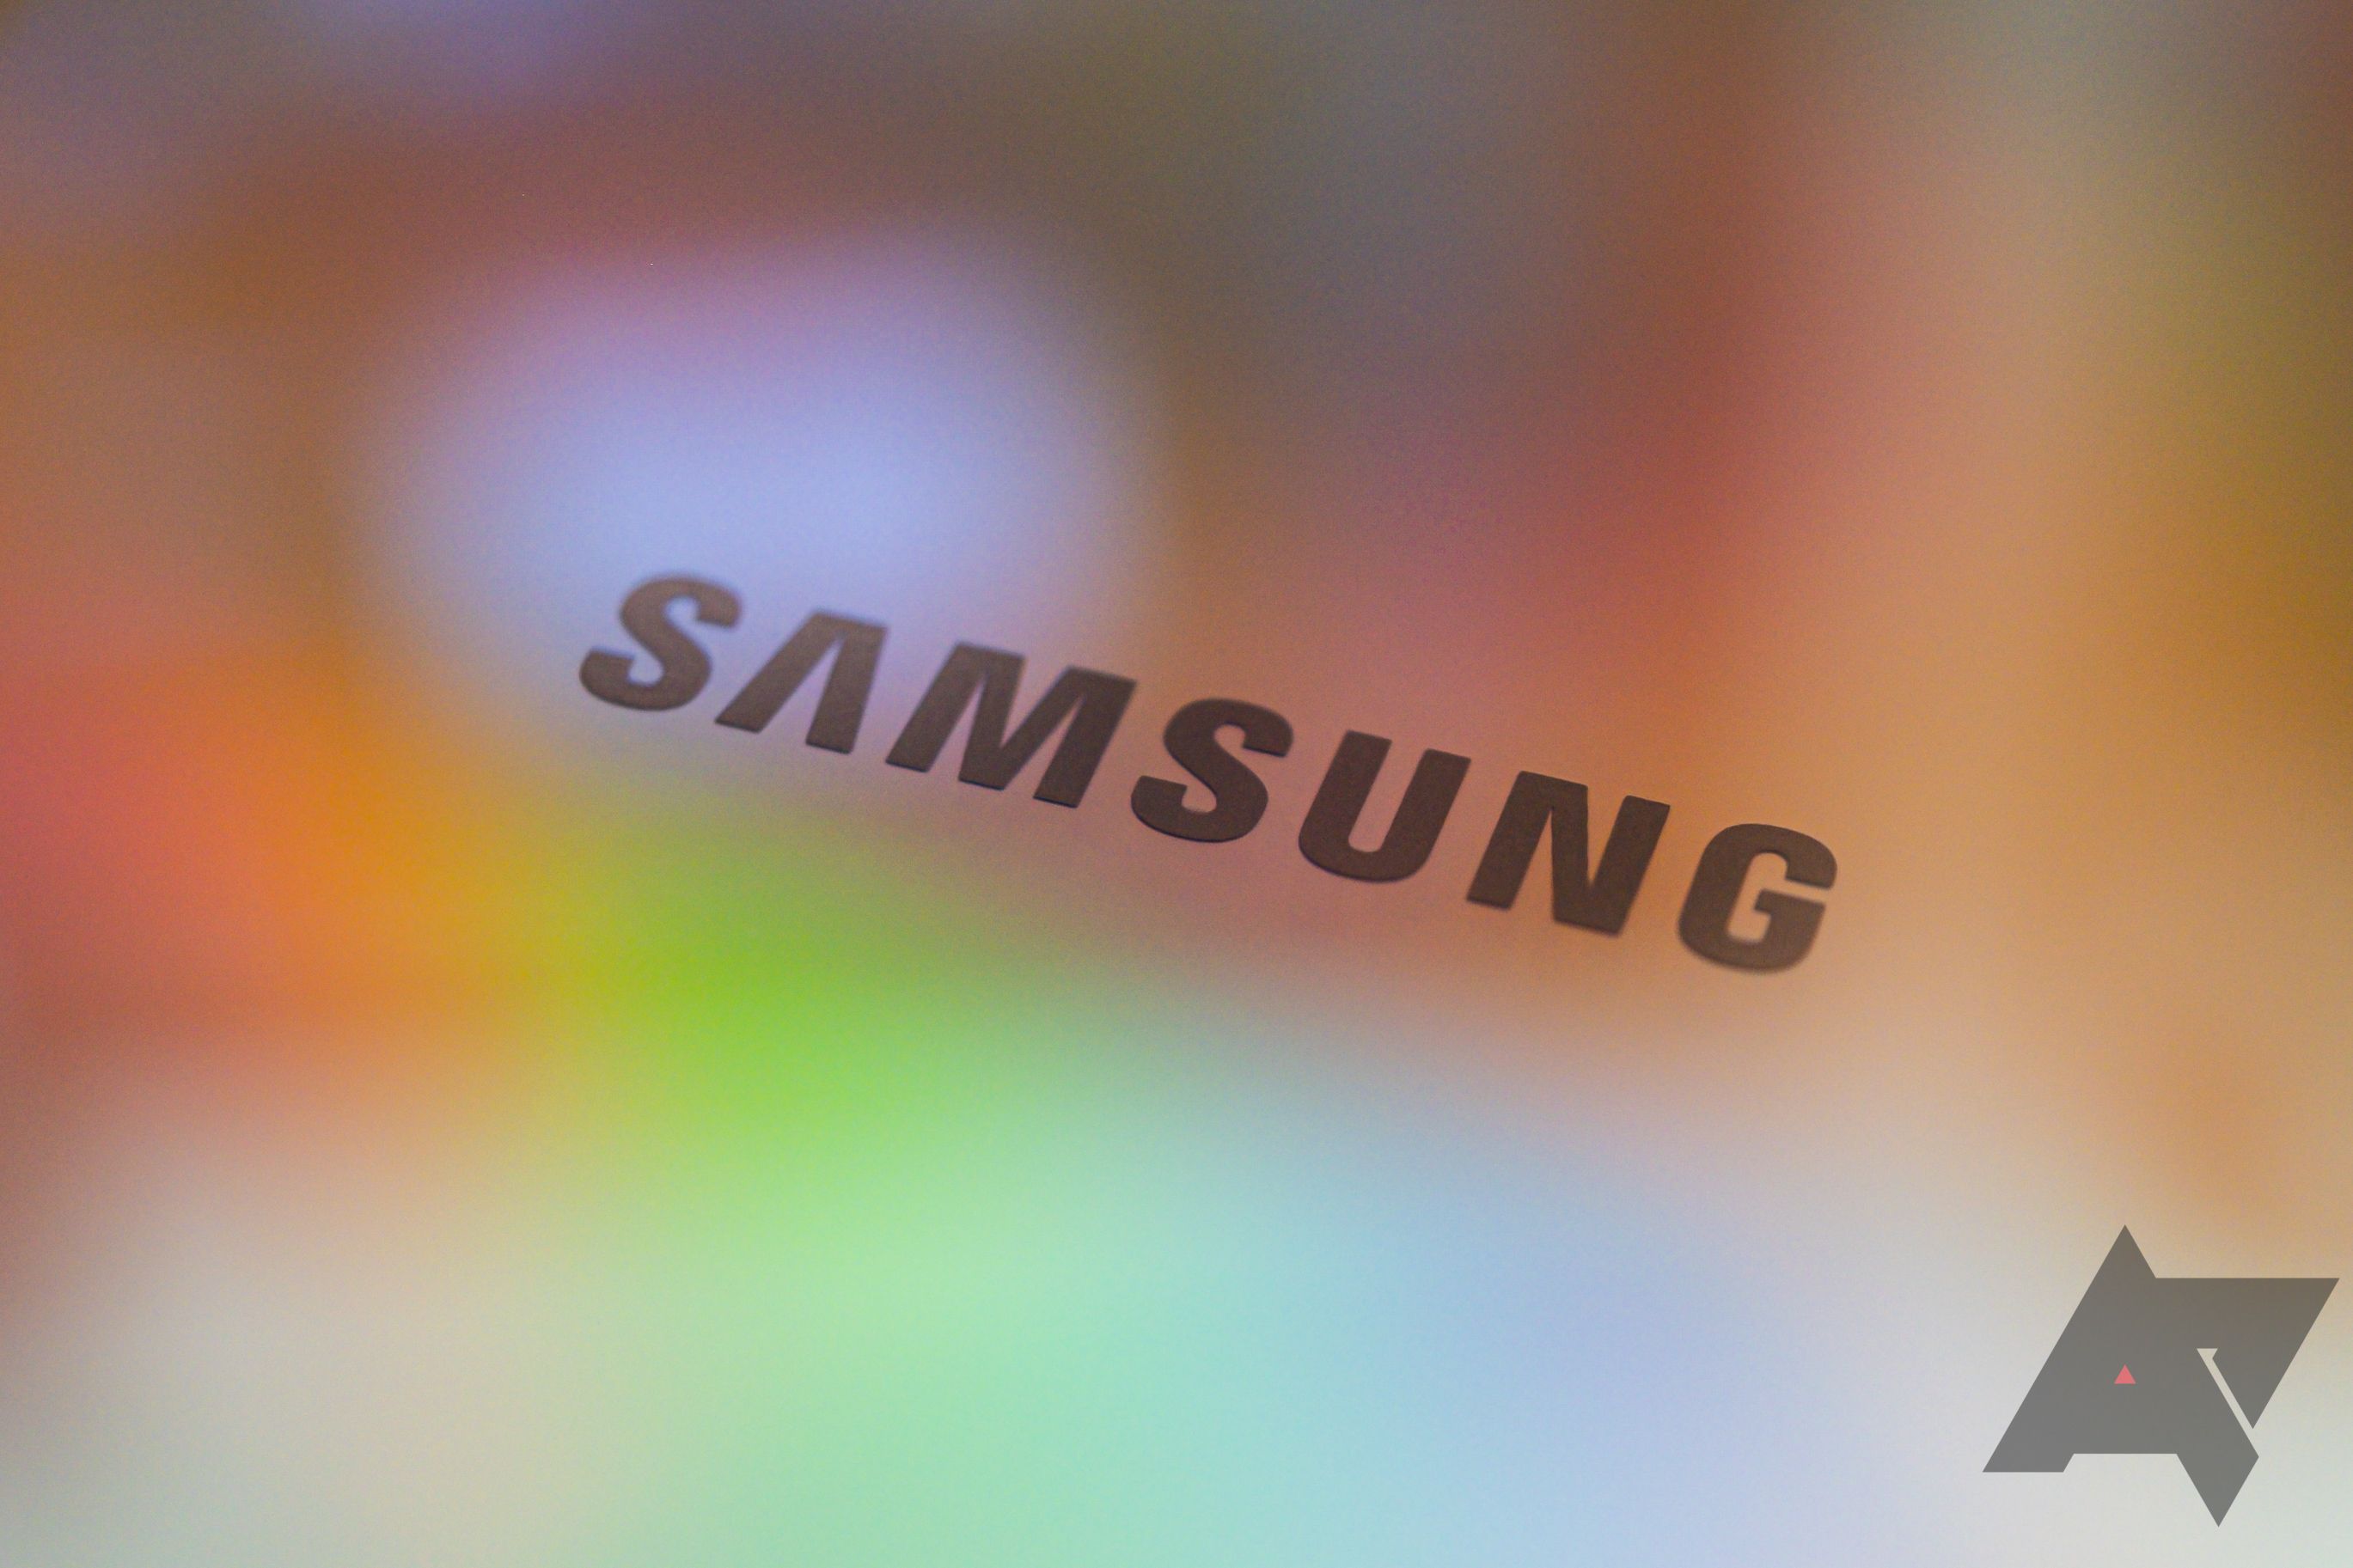 These are the official Galaxy S22 Ultra cases Samsung will soon unveil